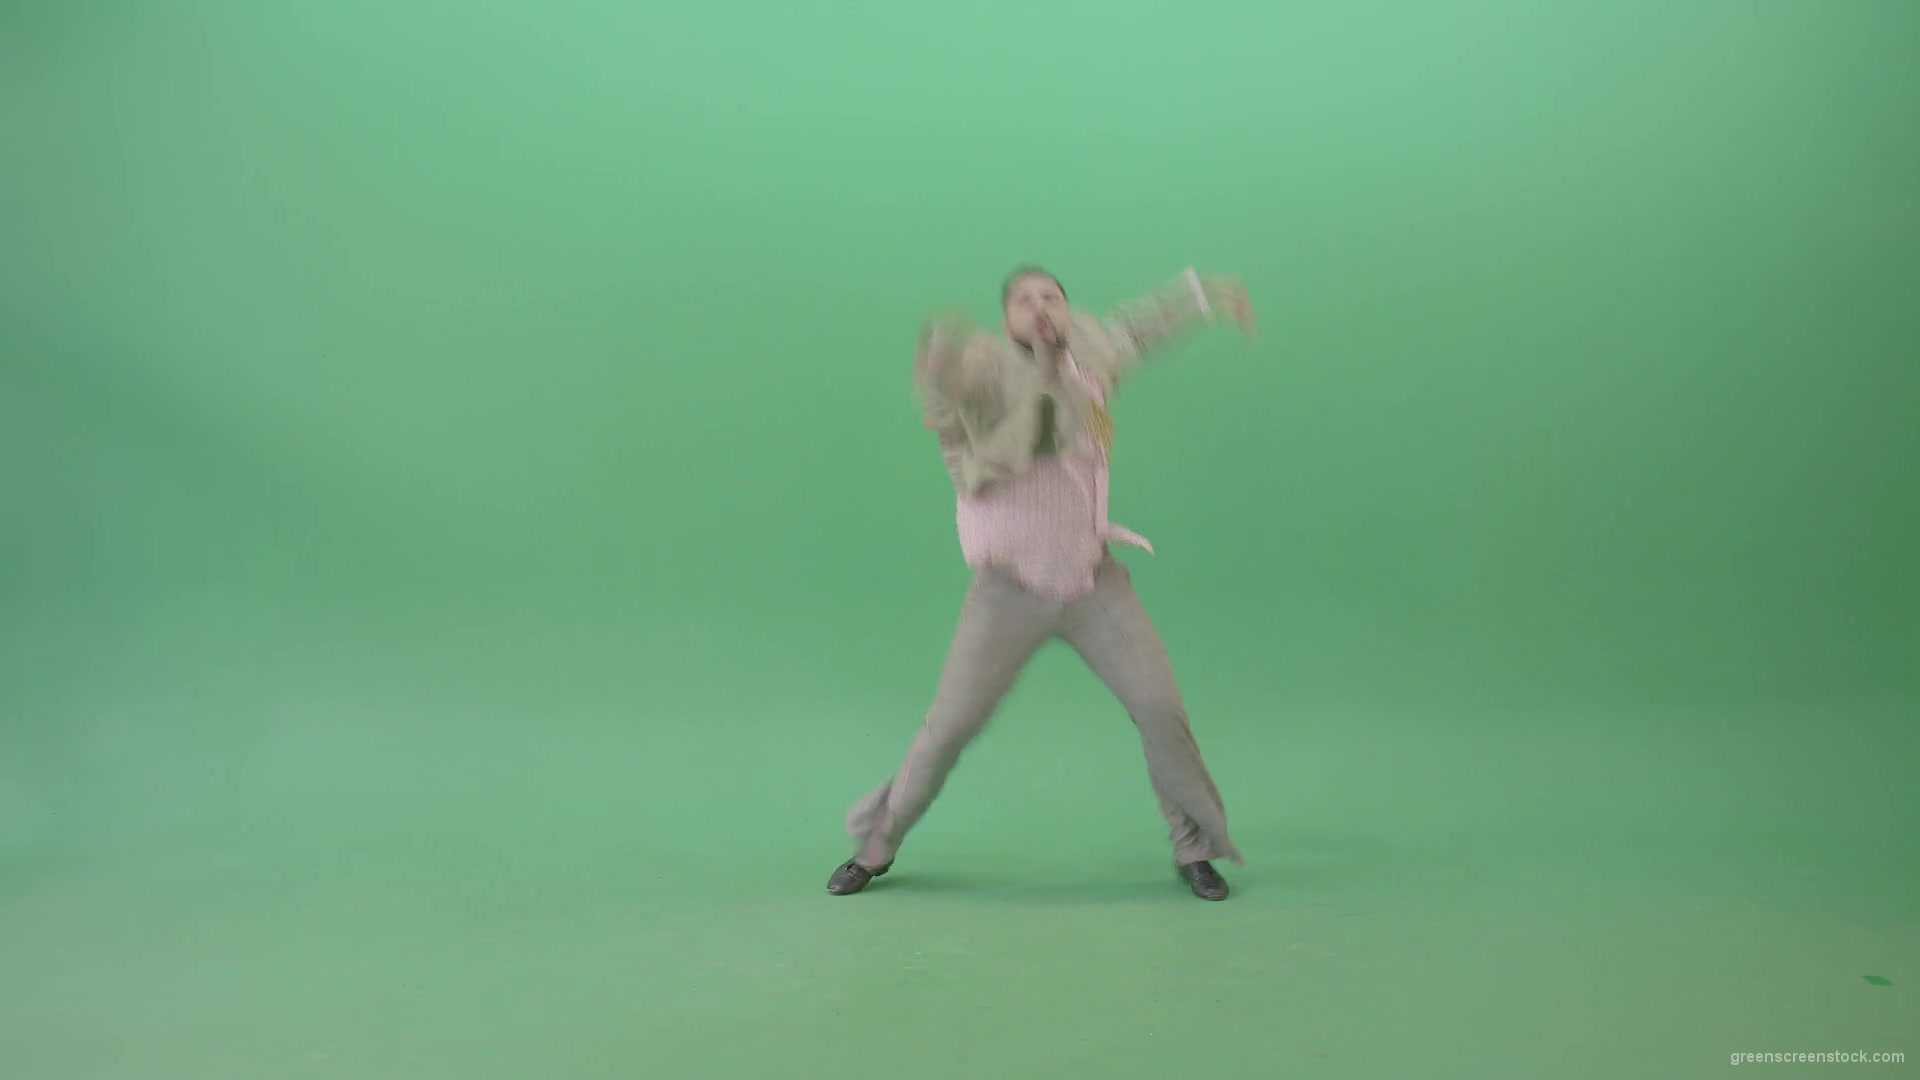 Man-dancing-shuffle-jazz-swing-Boogie-woogie-and-jumping-isolated-over-Green-Screen-4K-Video-Footage-1920_009 Green Screen Stock